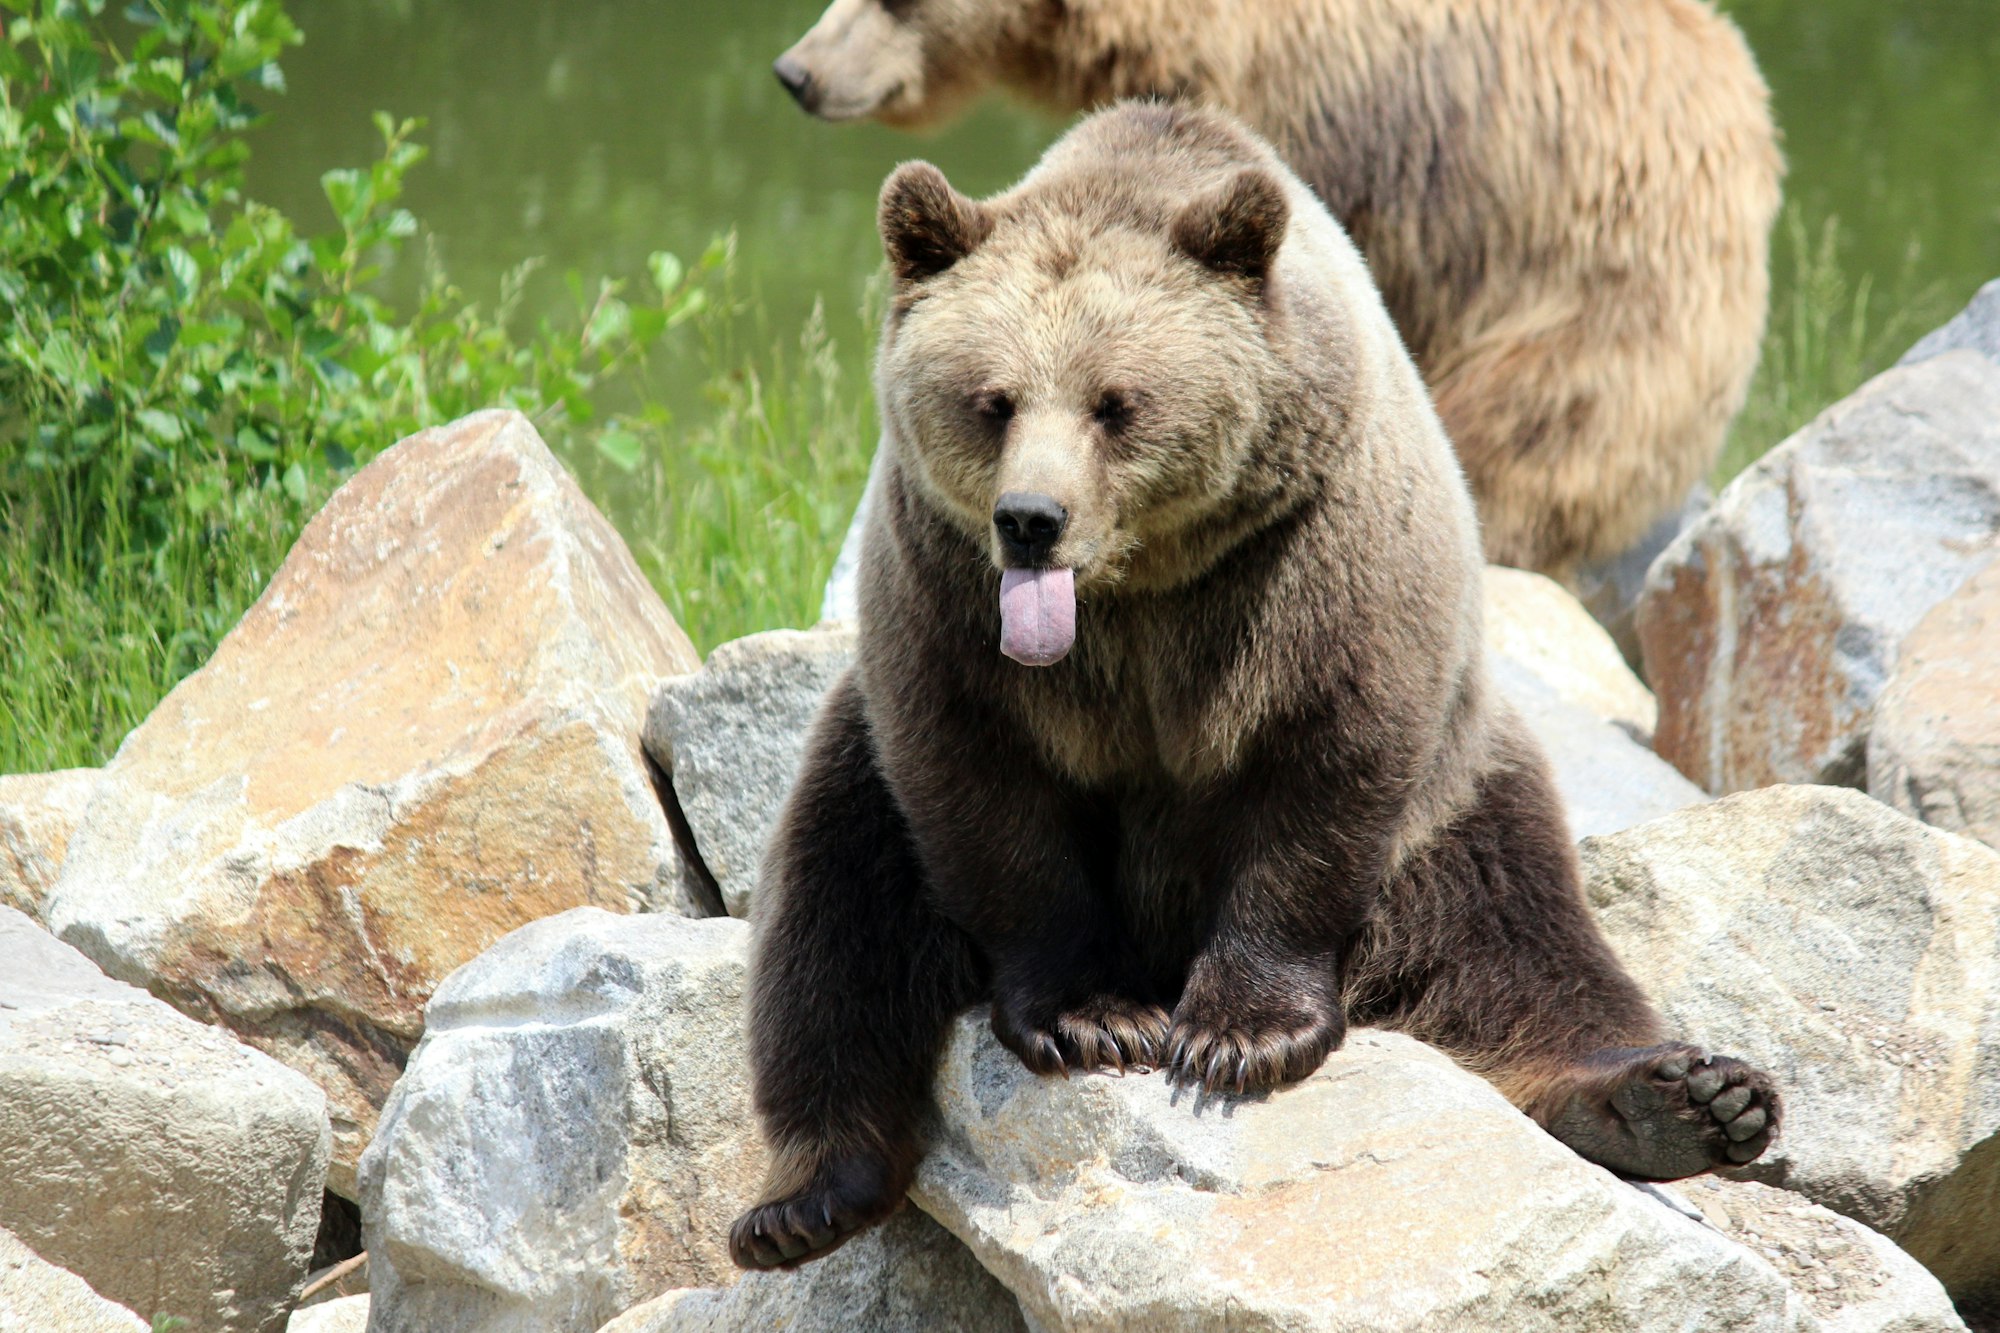 brown bear on green grass during daytime sticking tongue out